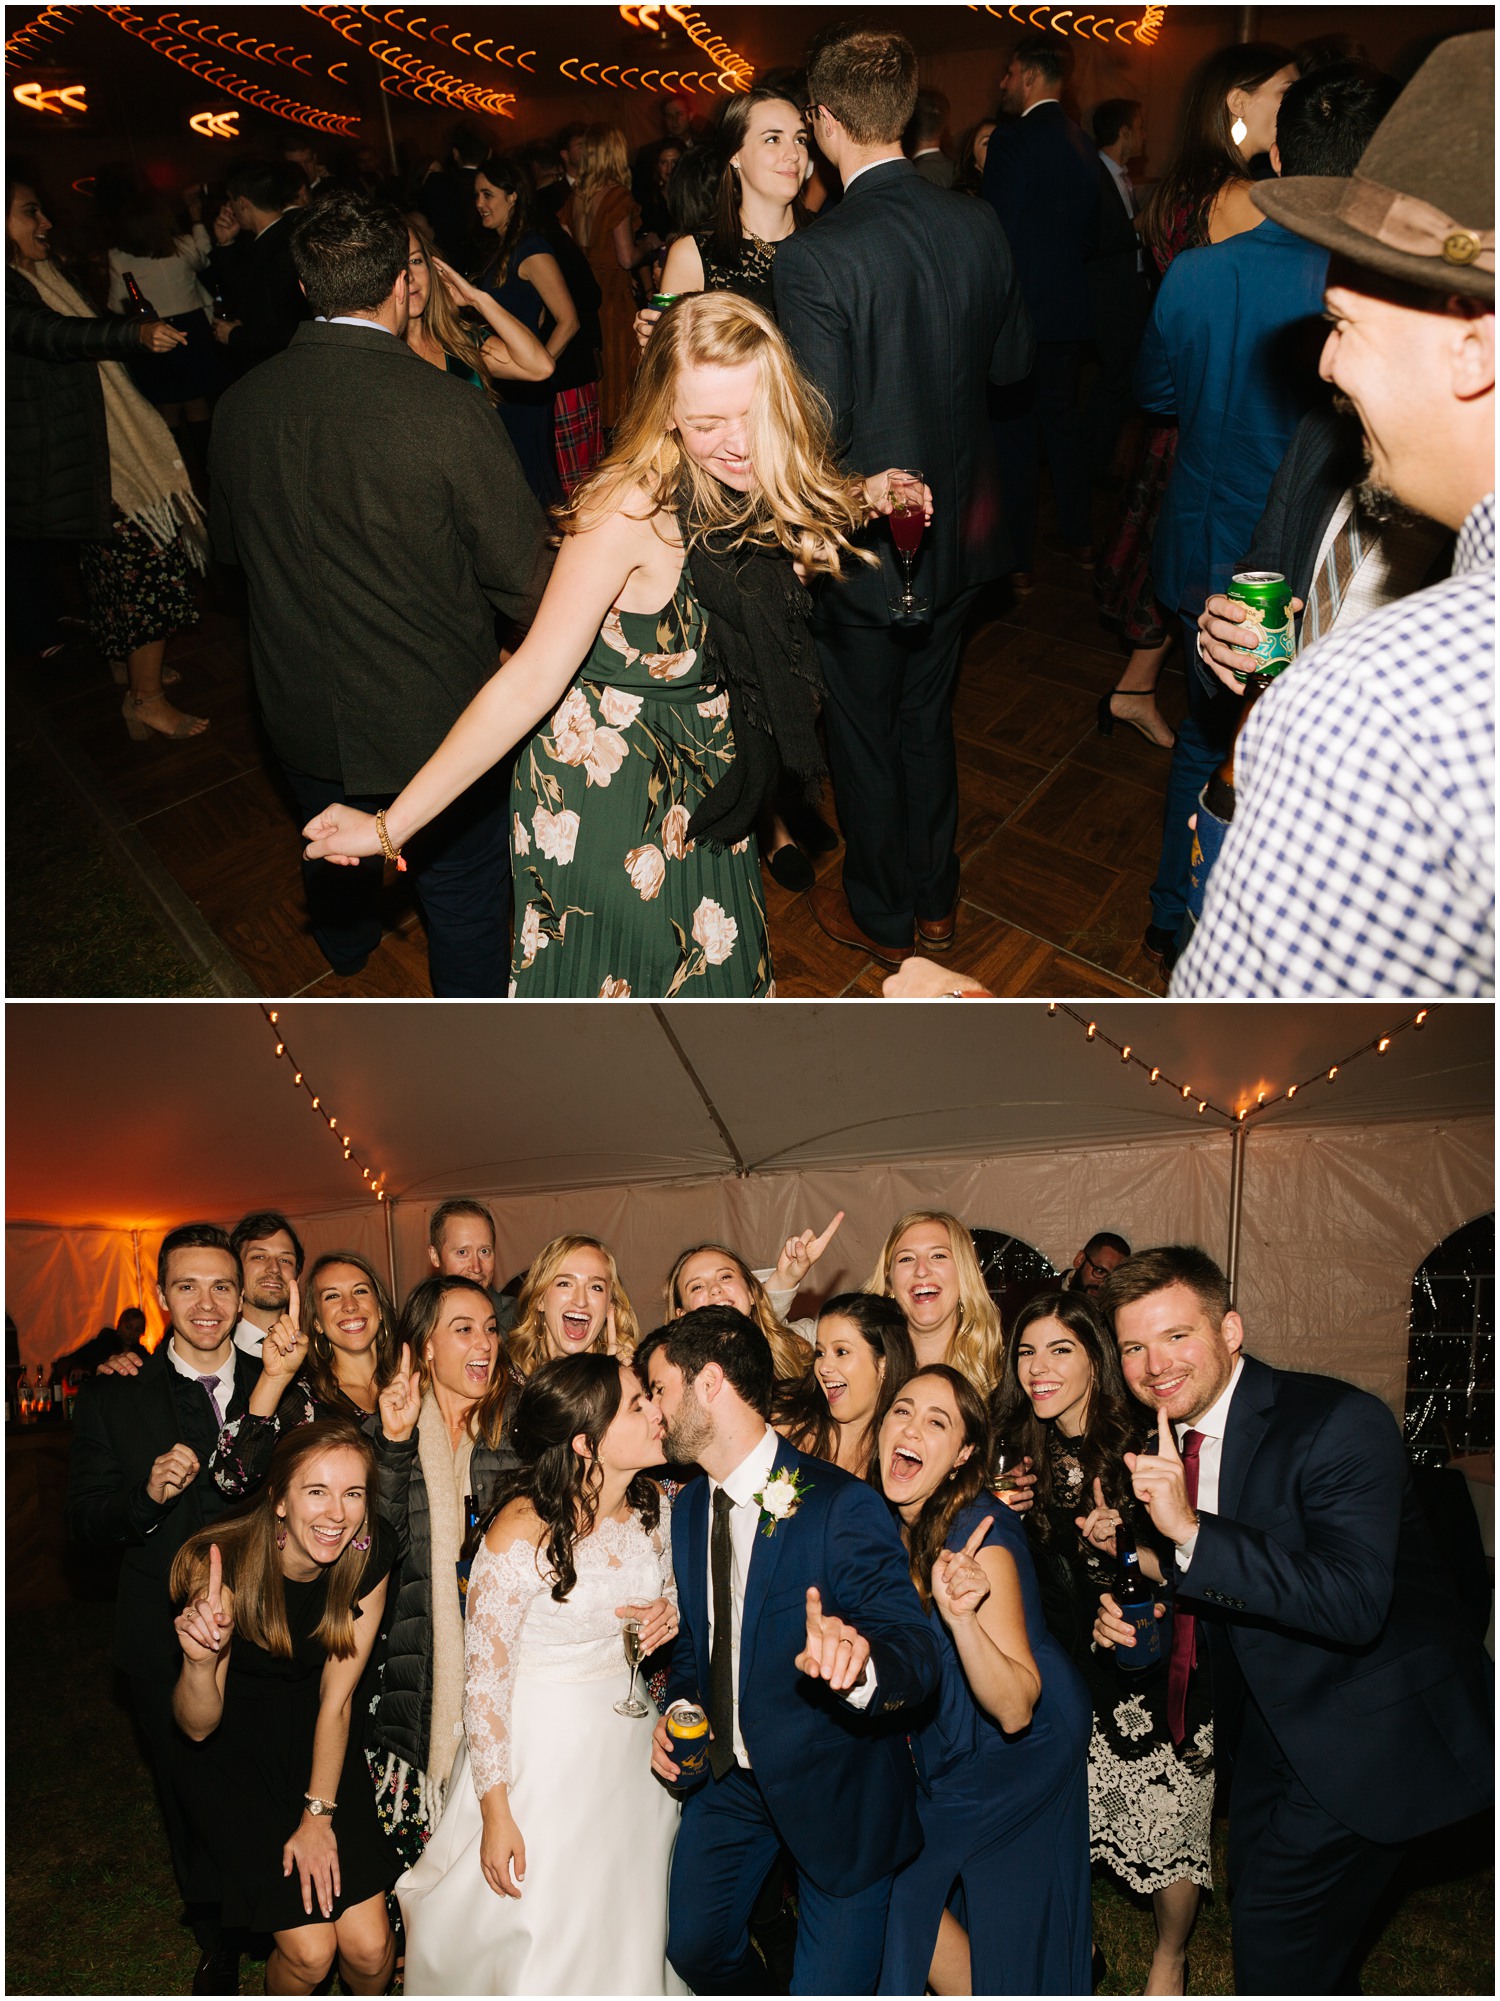 guests dance and pose with bride and groom during Asheville NC wedding reception